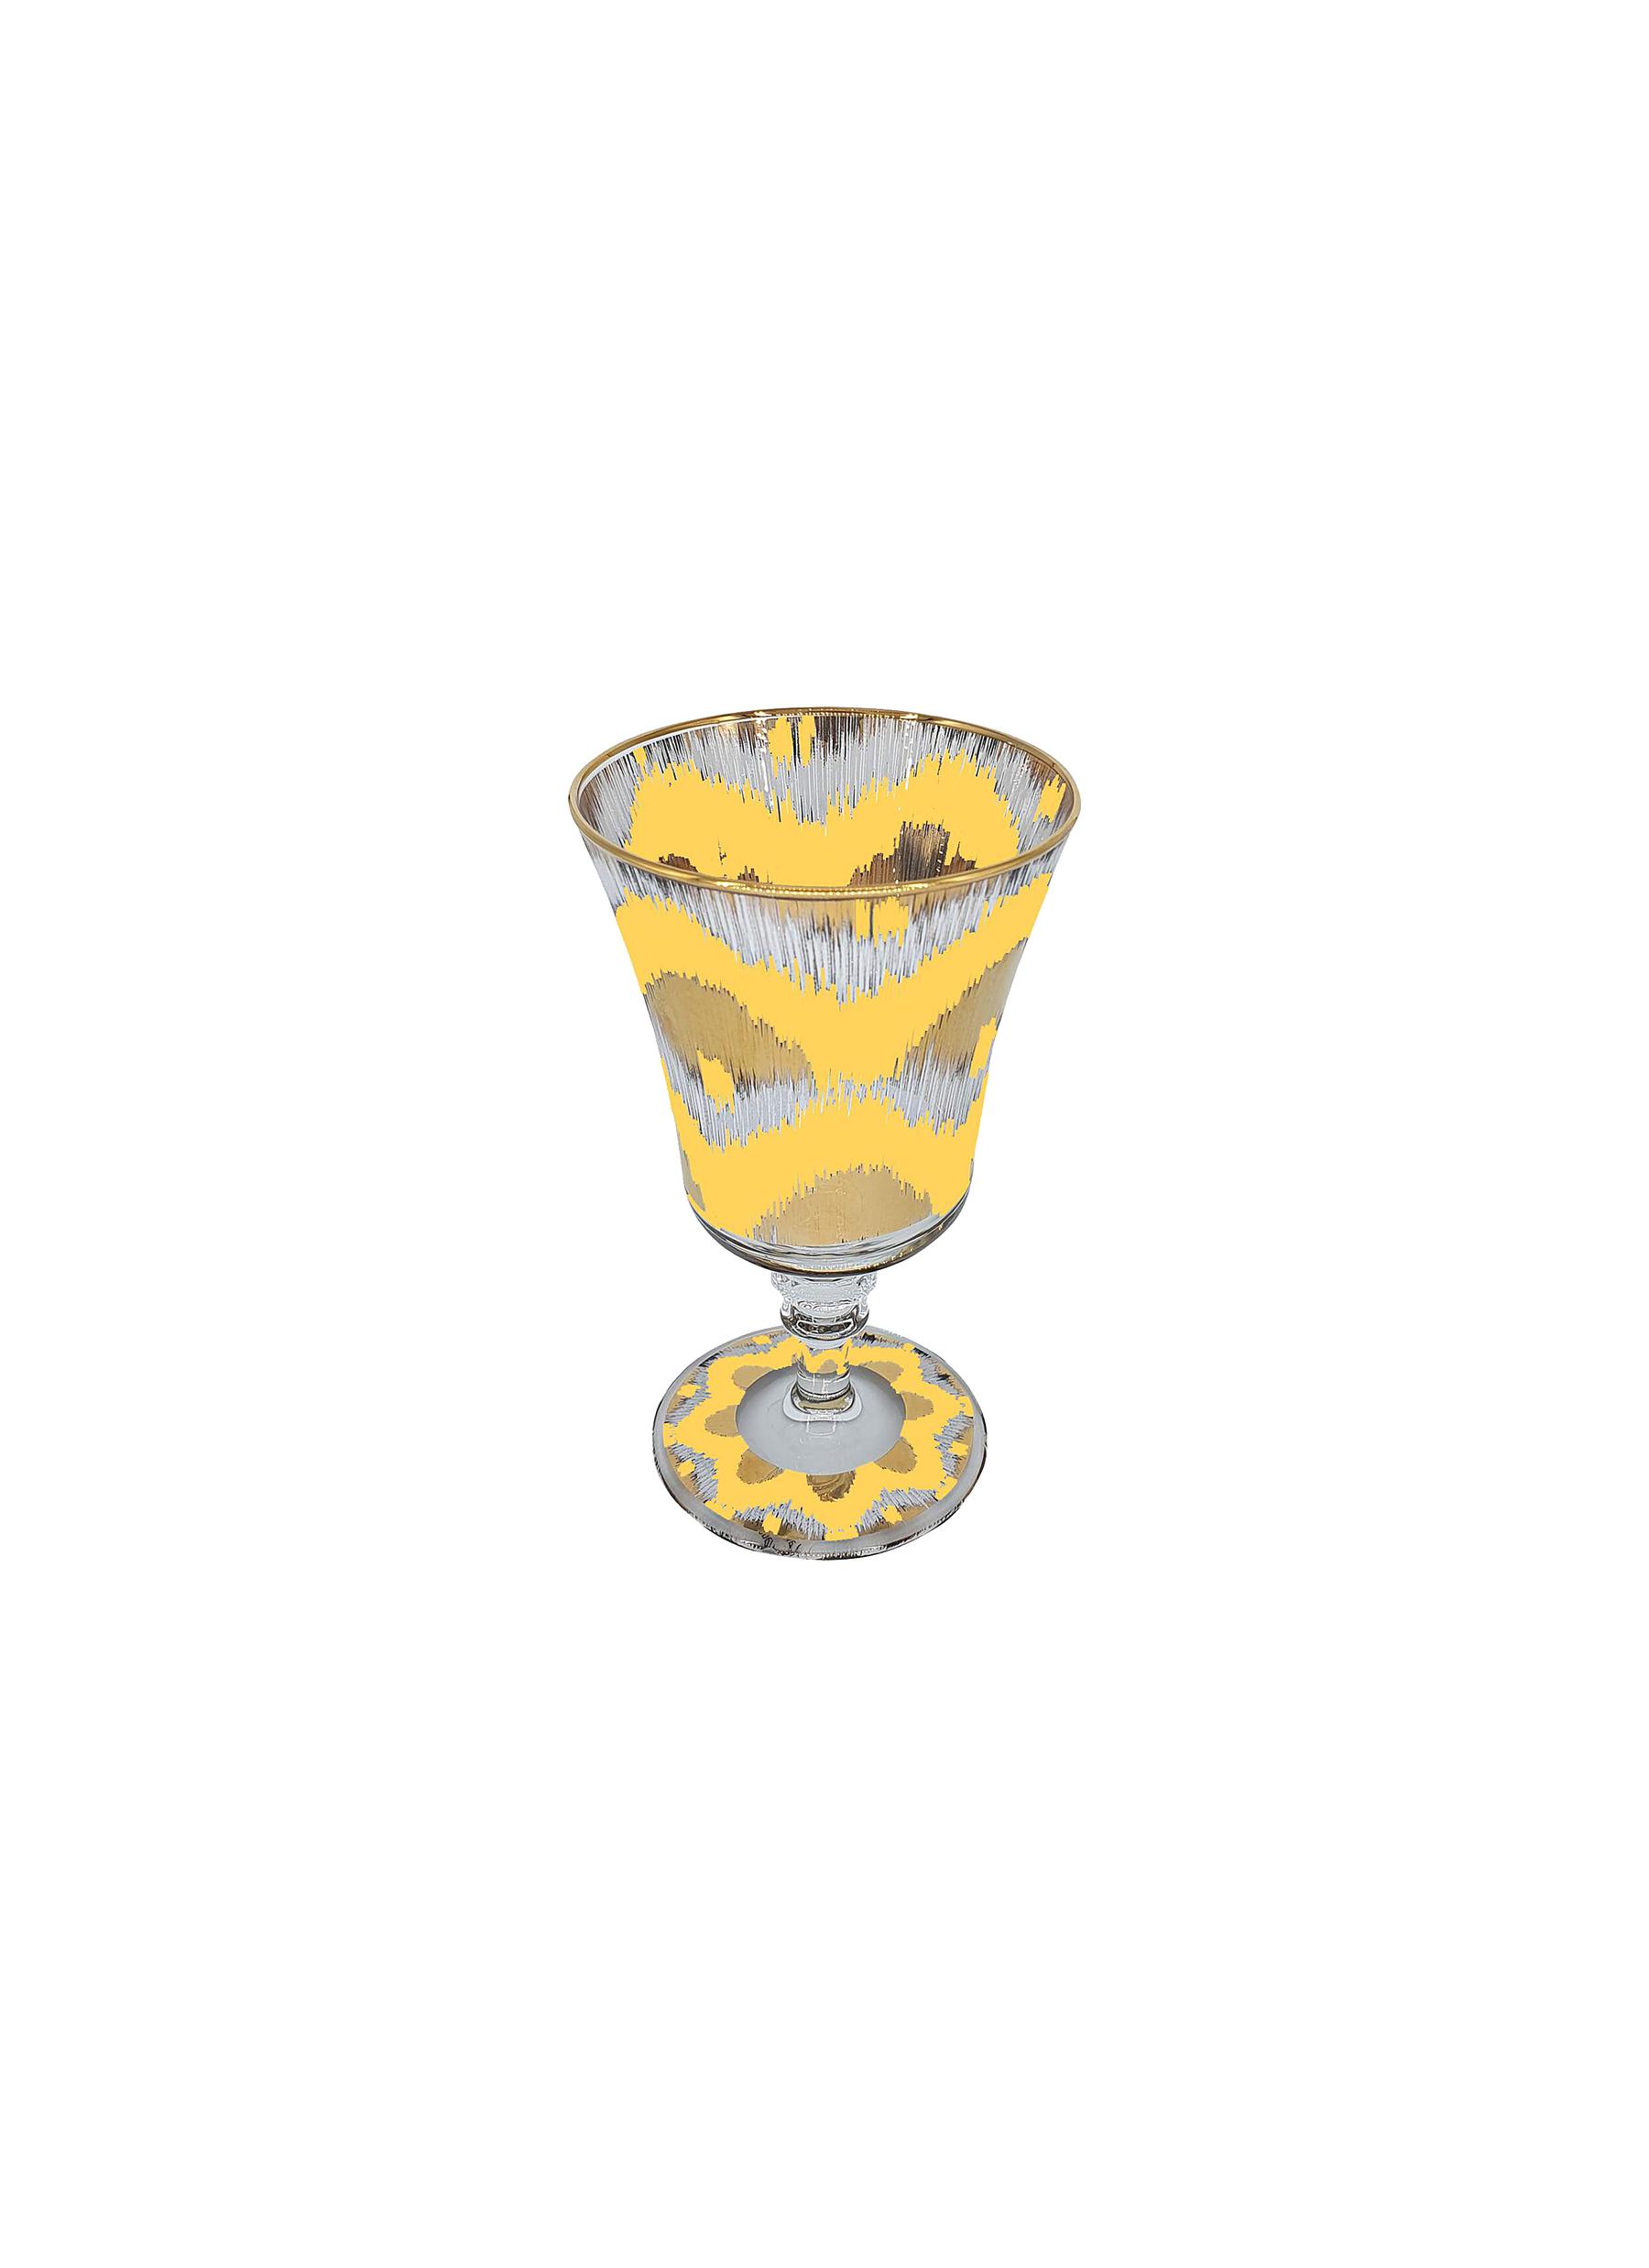 Les Ottomans Yellow Patterned Footed Glass